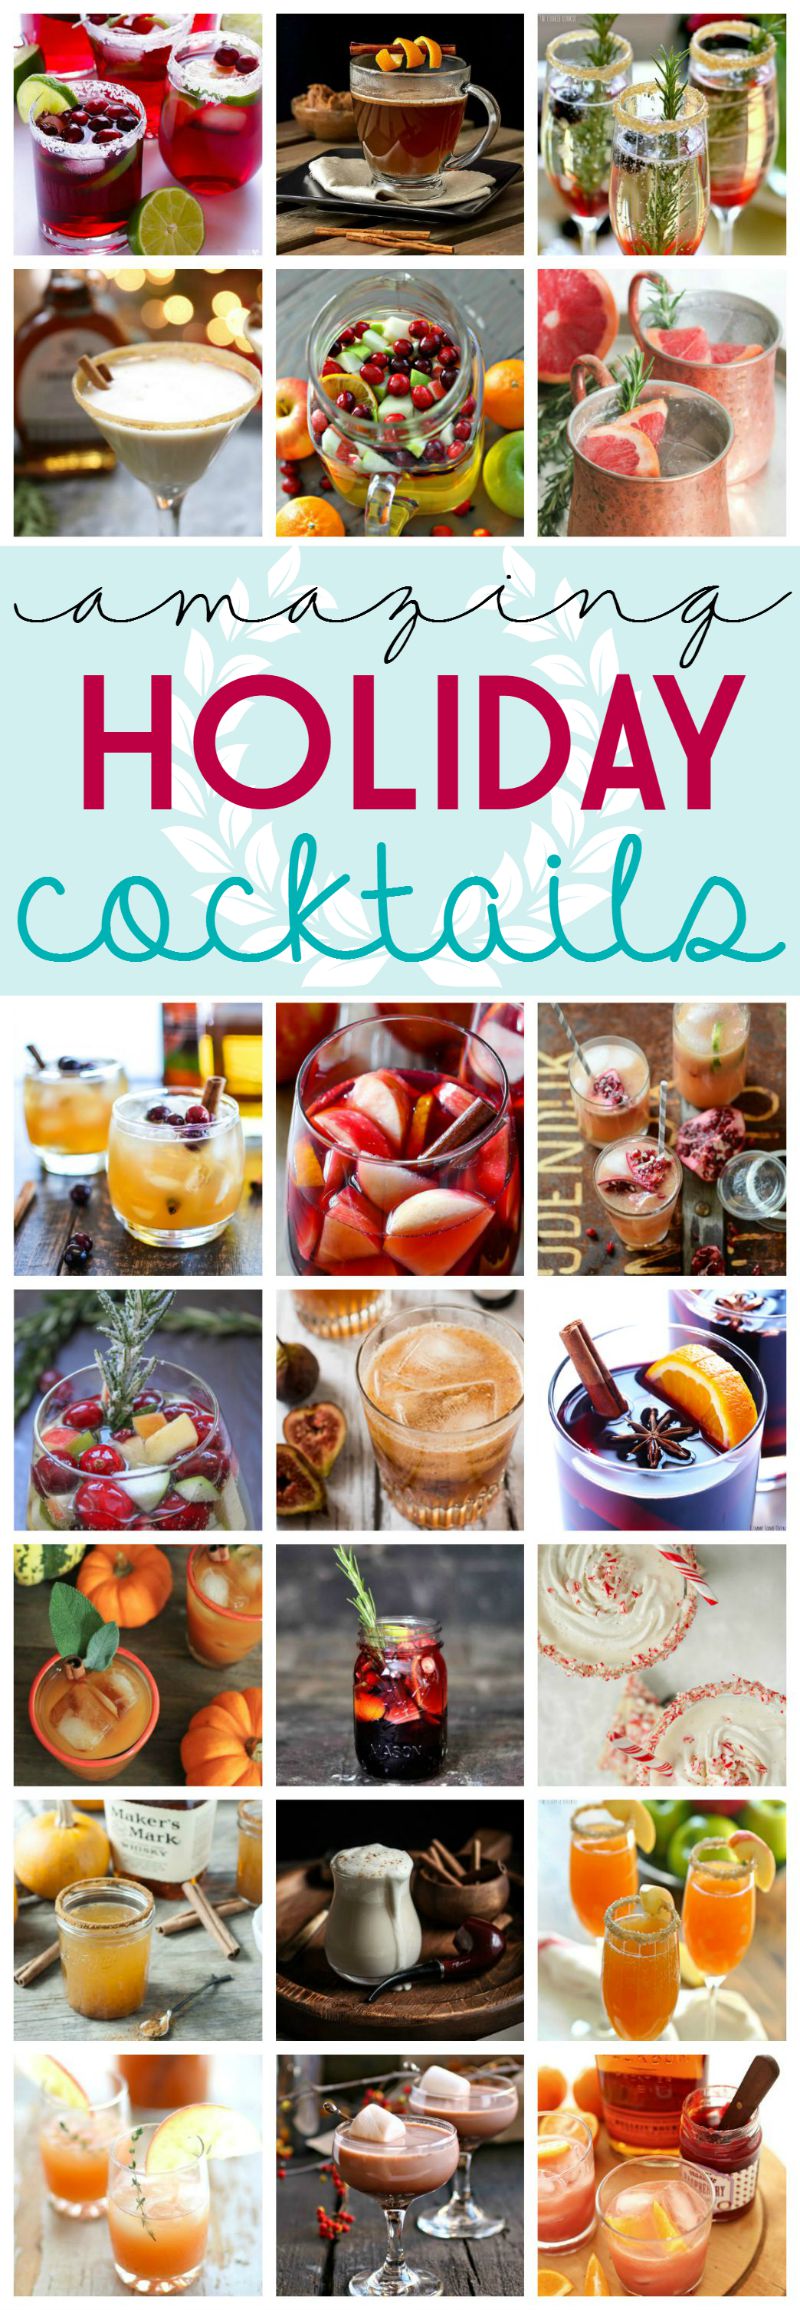 Holiday Cocktails Ideas on Frugal Coupon Living